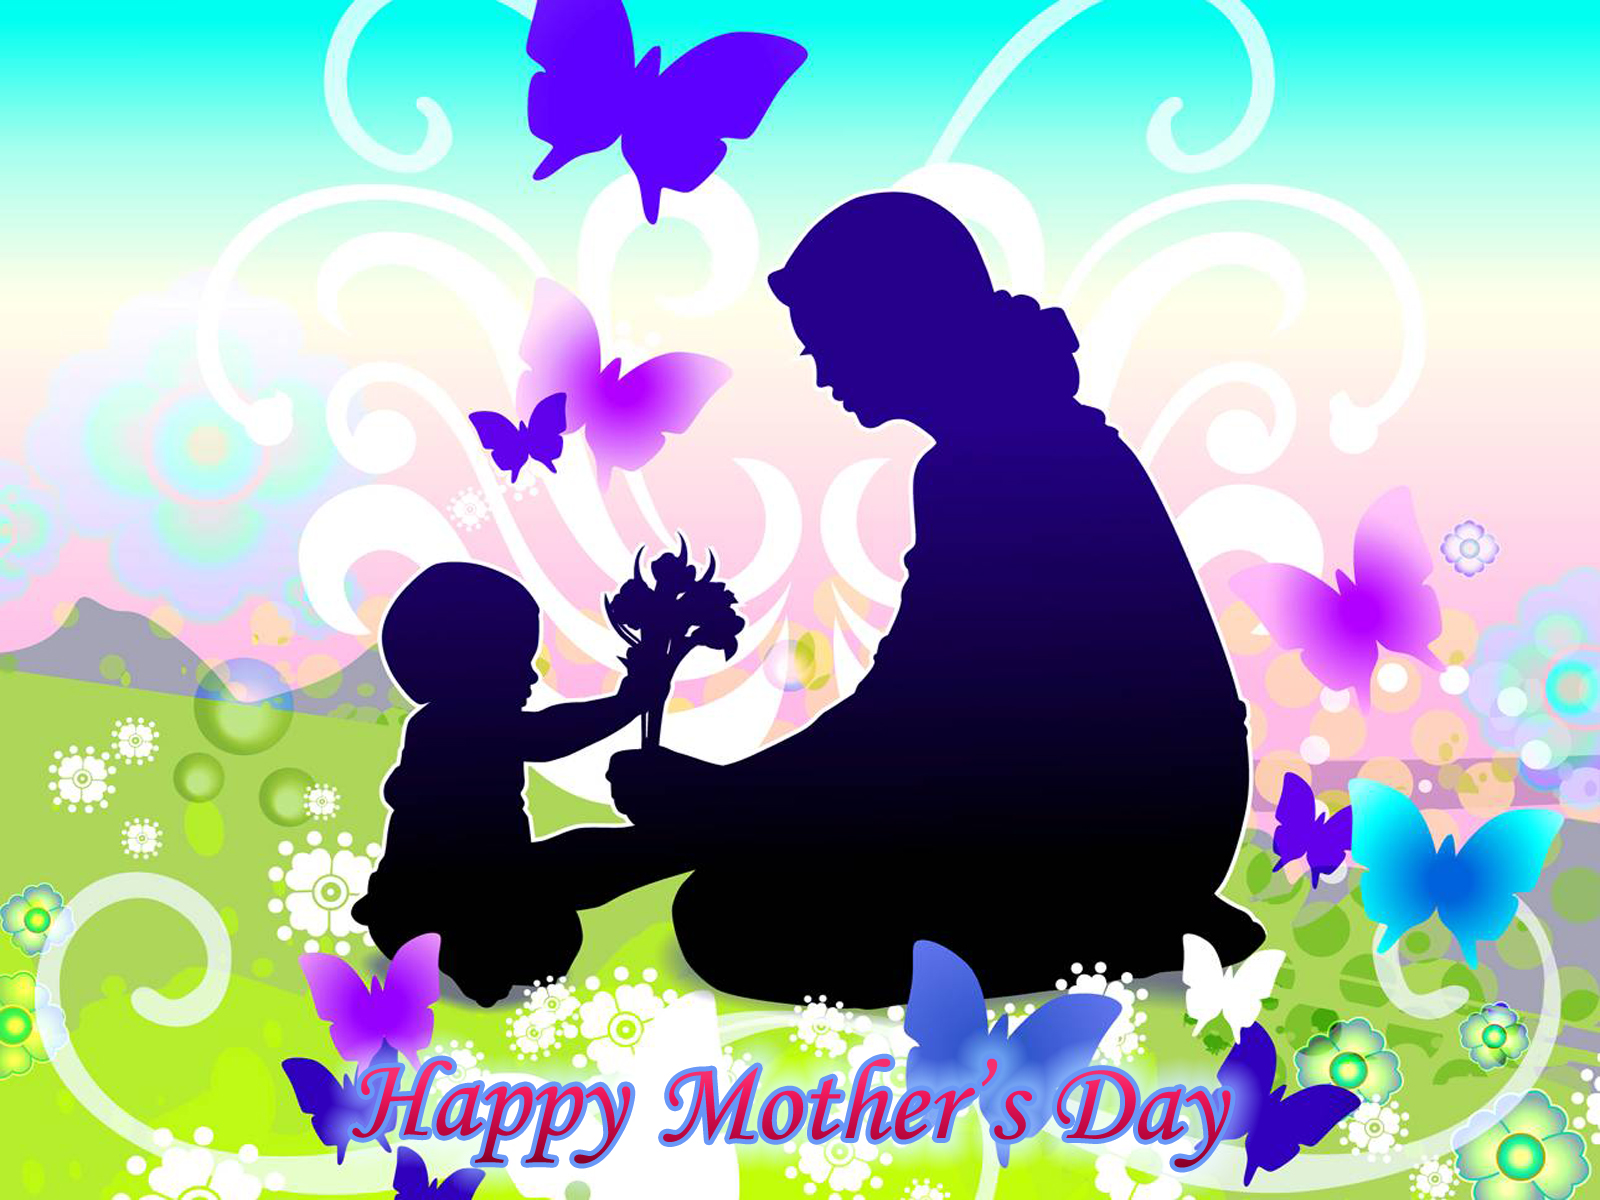 Mother's day 2022 images